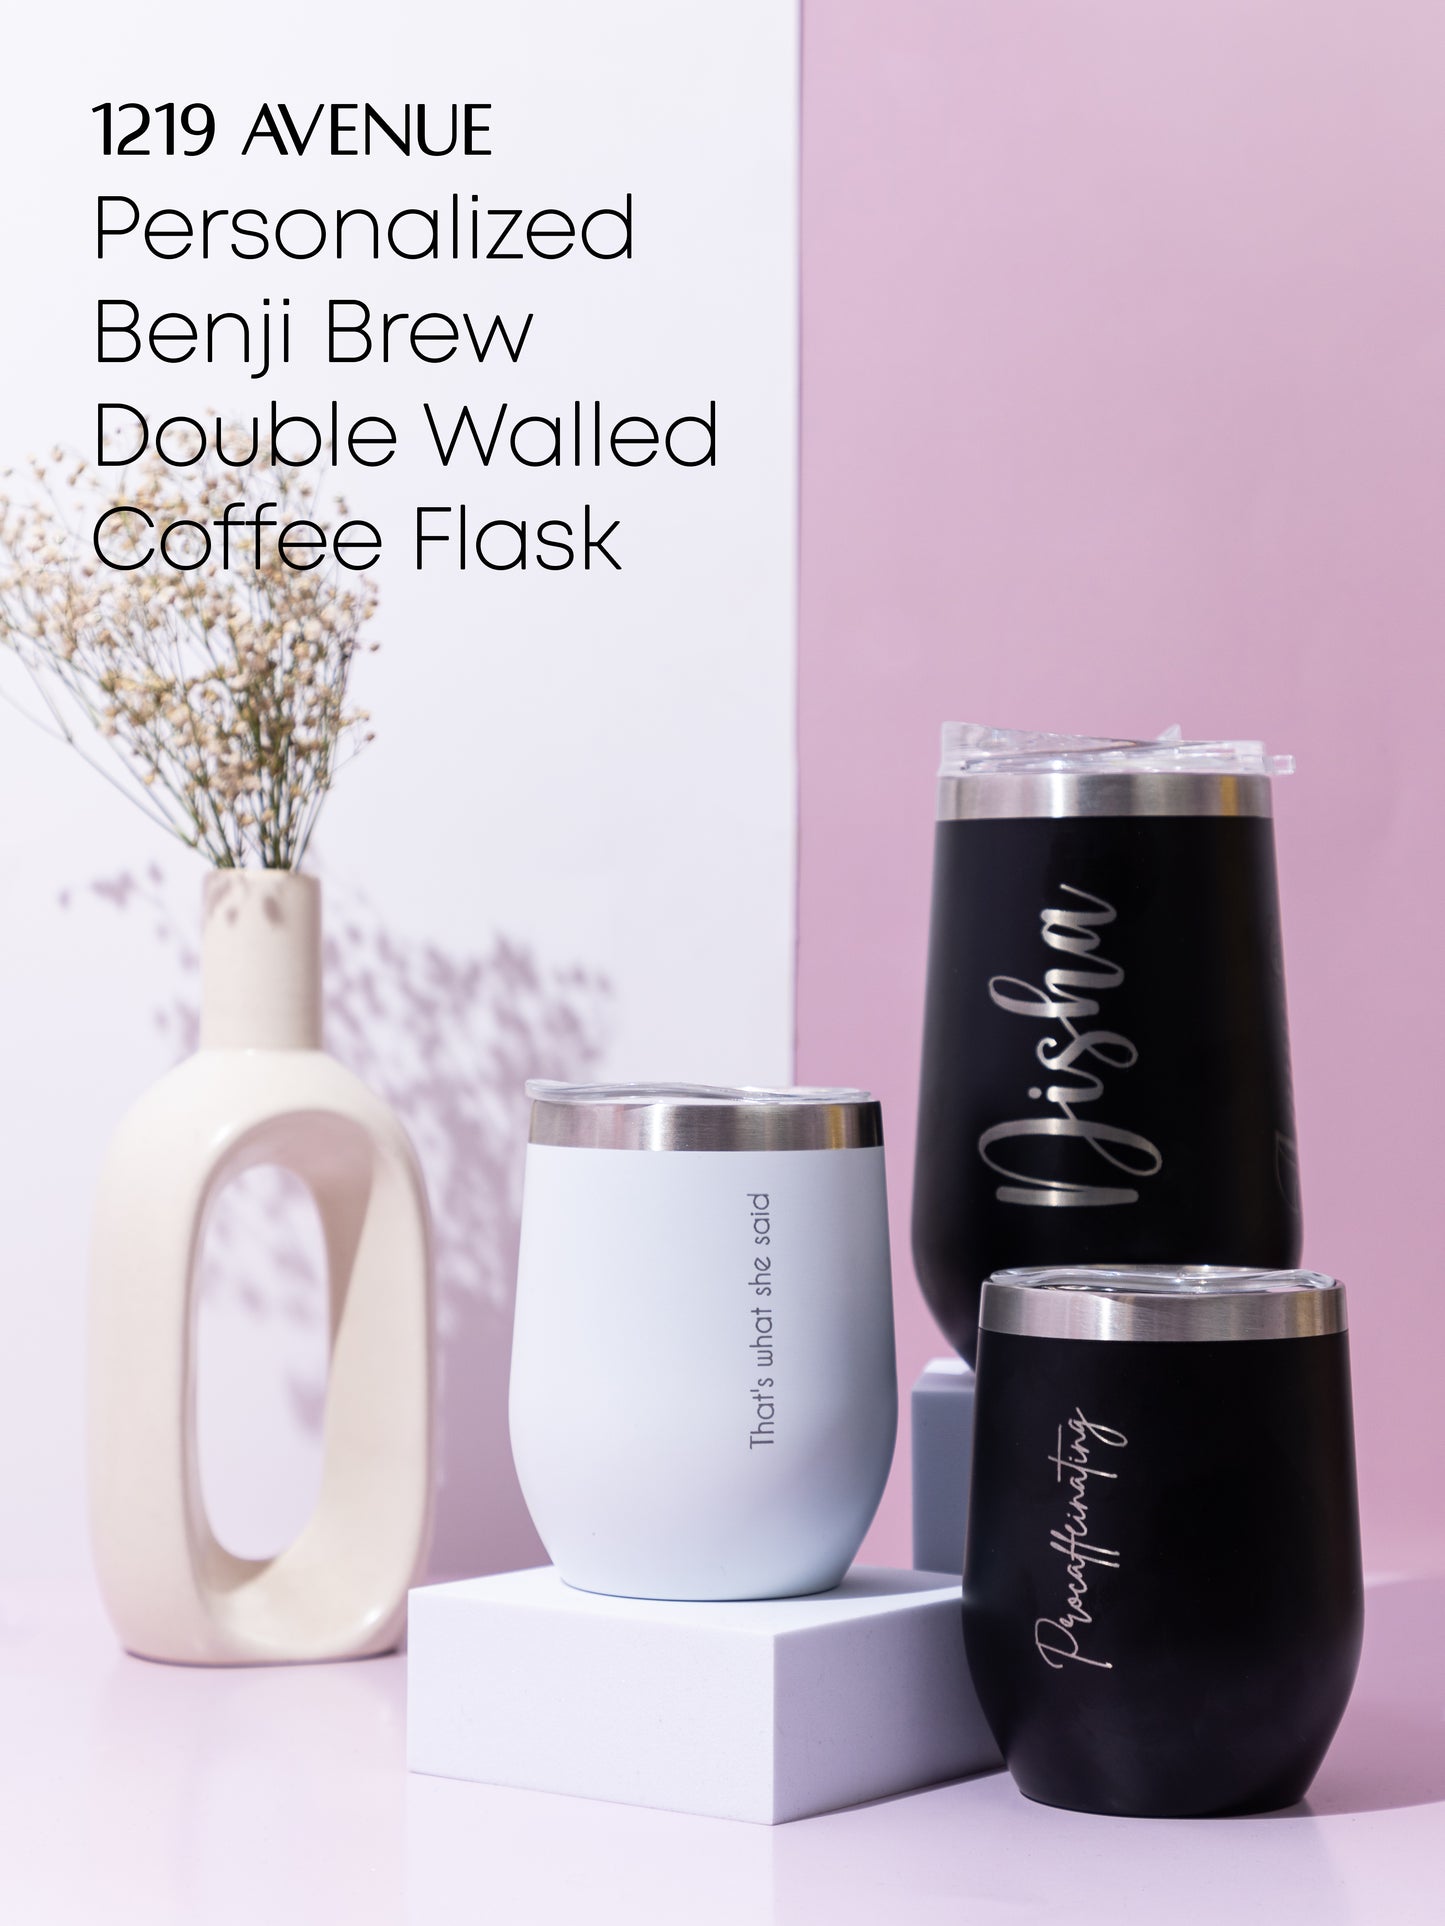 Personalized Name/Quote Benji Brew Coffee Flask 400ml